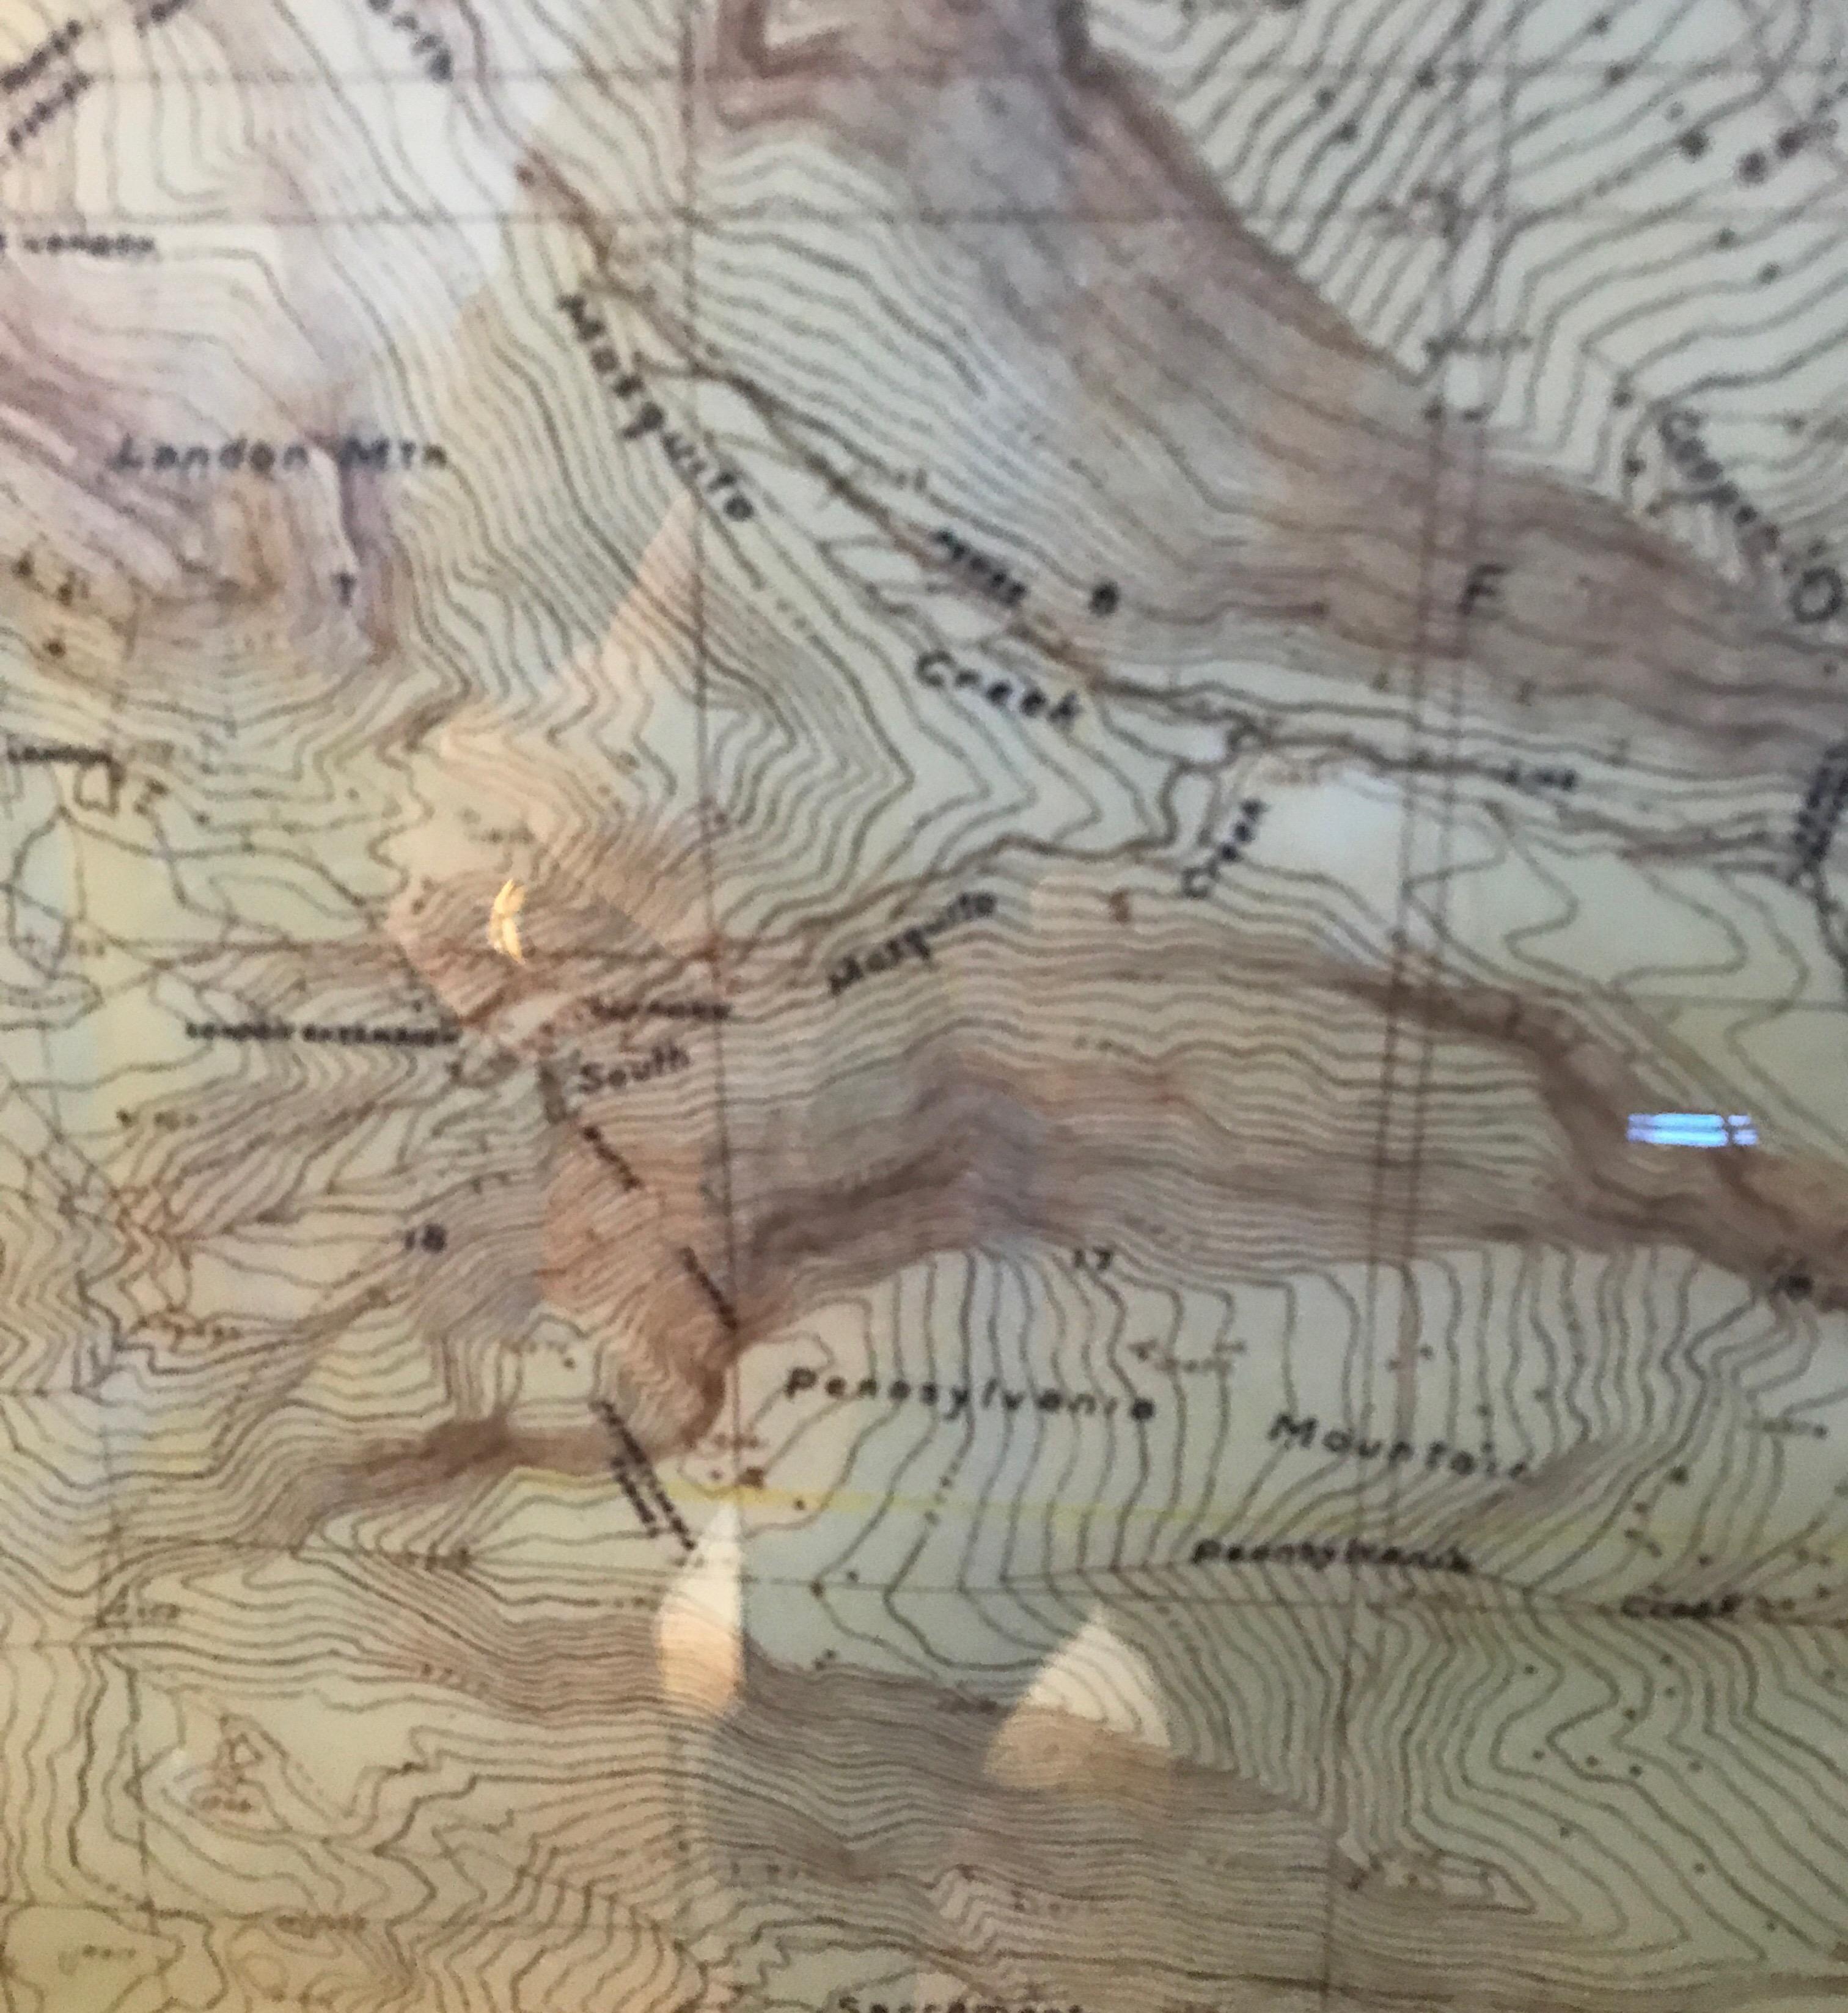 19th century topographical map of the Pennsylvania Mountains.
The map is framed in a beautiful original craftsman quarter sawn oak frame.
 